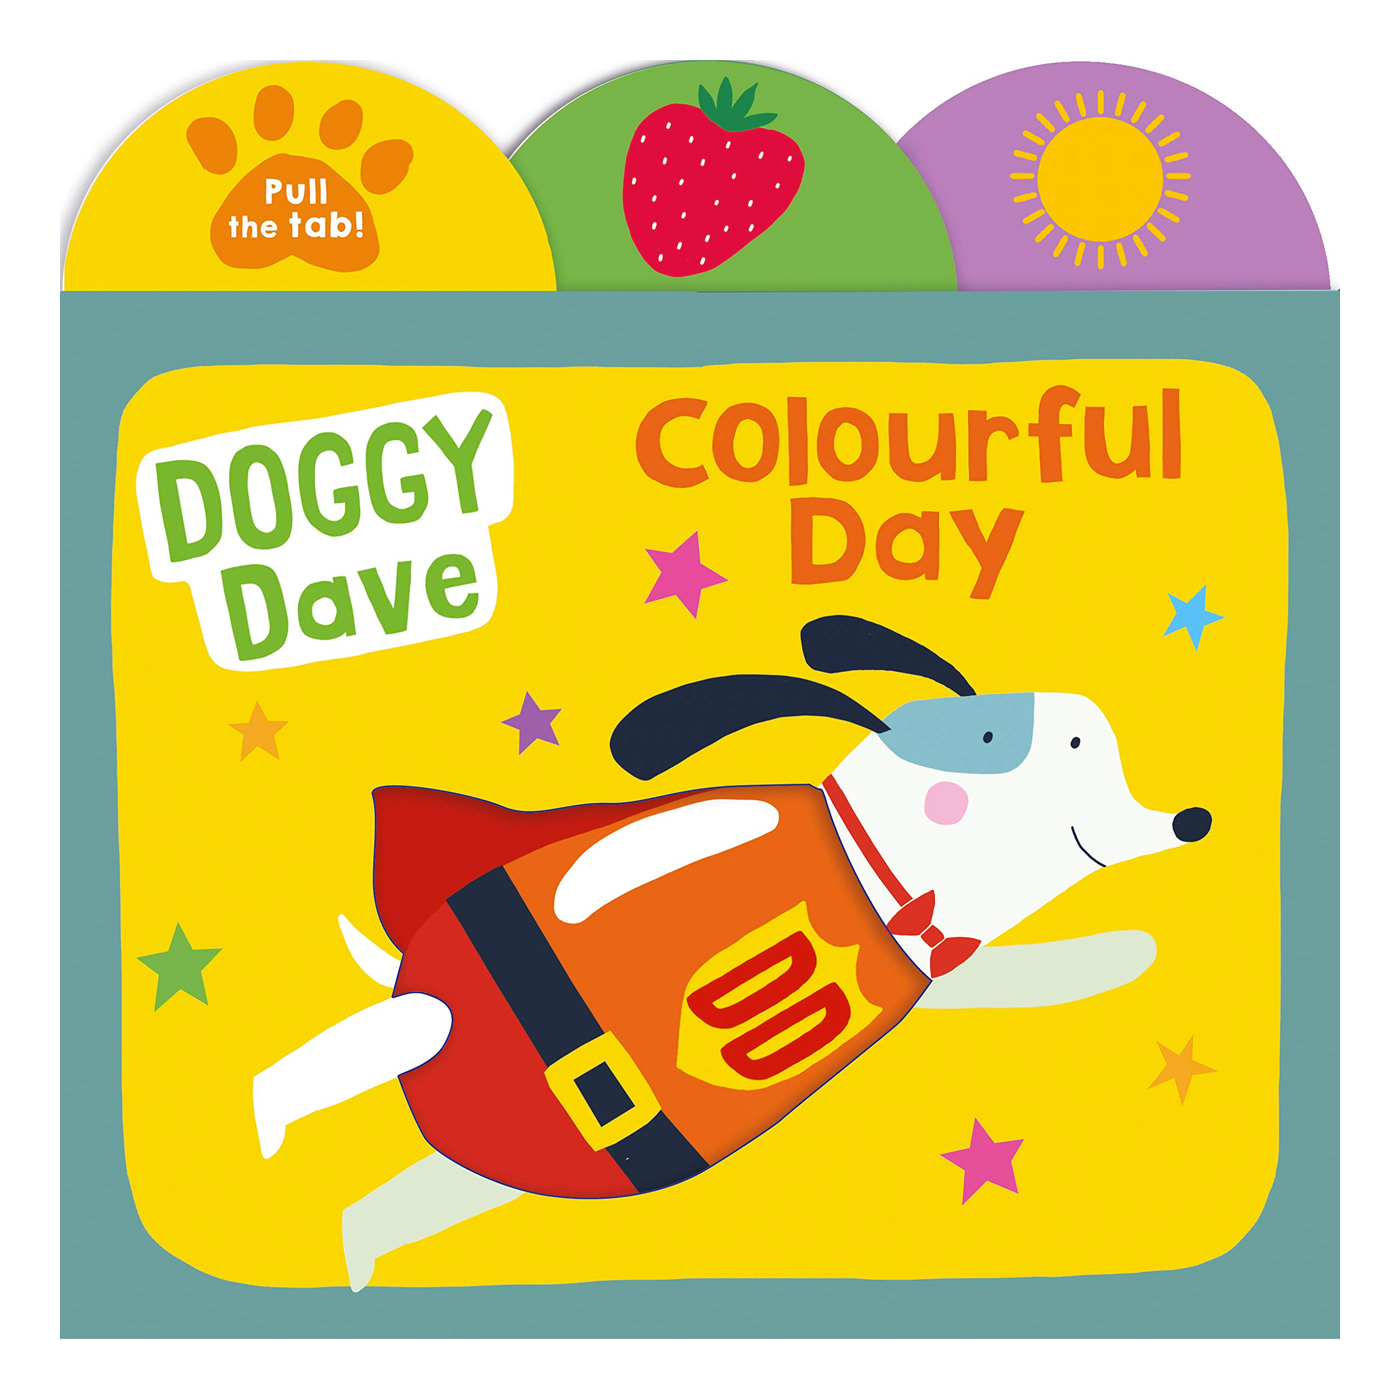  Doggy Dave: Colourful Day